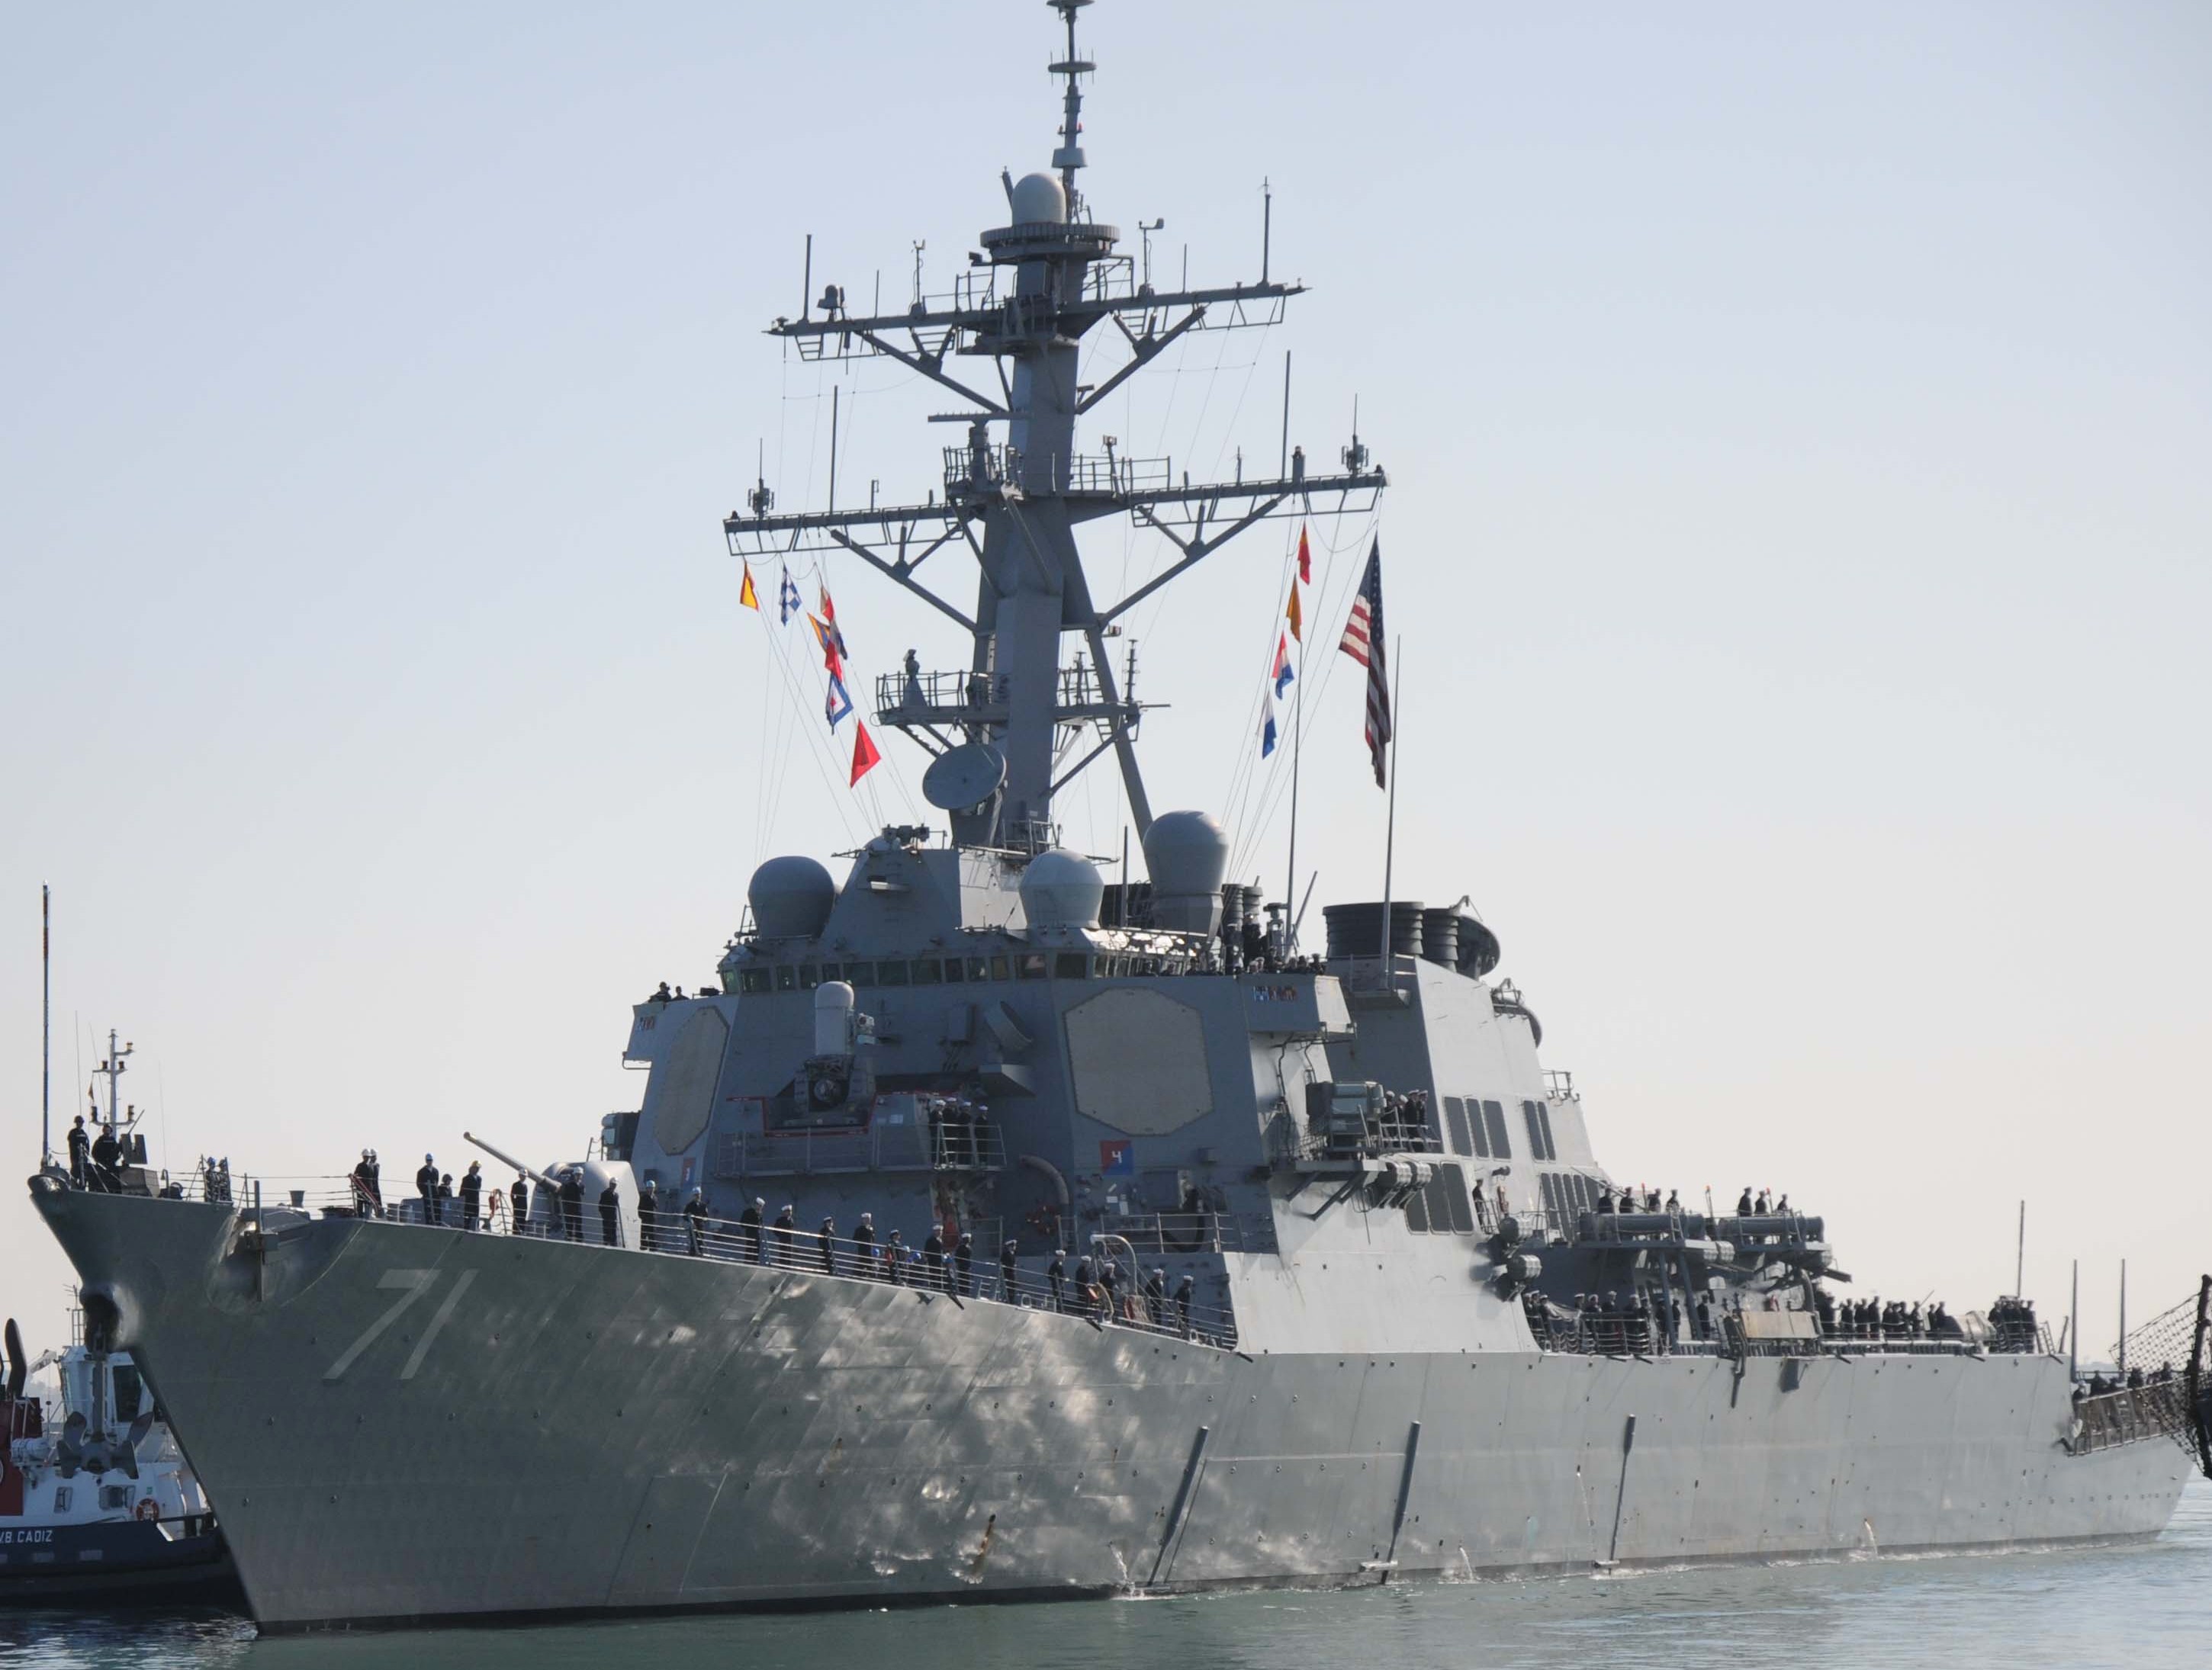 ddg-71 uss ross guided missile destroyer arleigh burke class aegis bmd 60 naval station rota spain